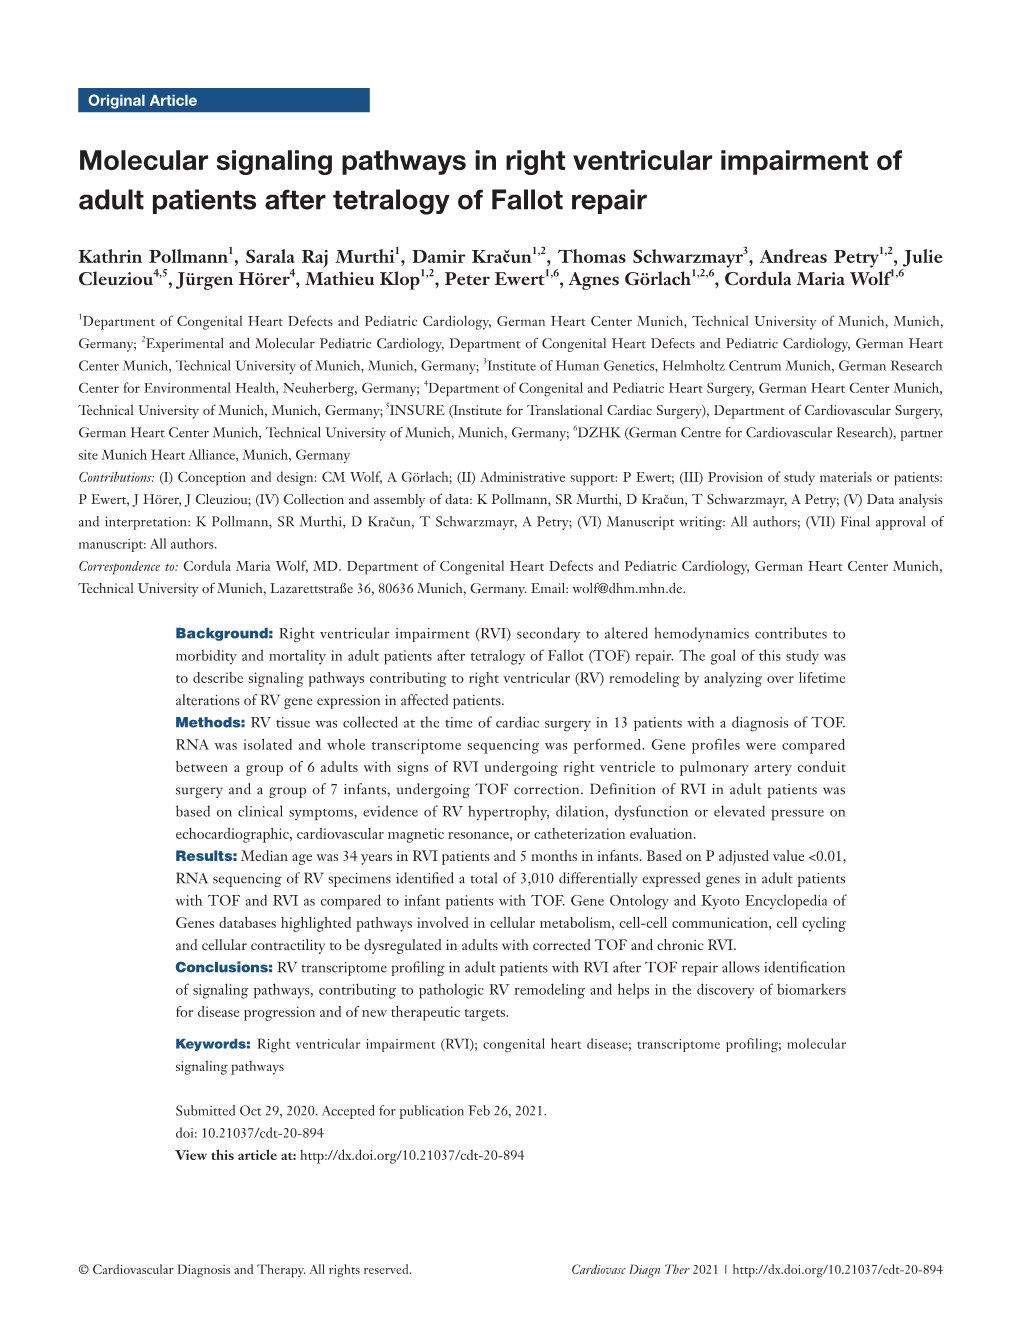 Molecular Signaling Pathways in Right Ventricular Impairment of Adult Patients After Tetralogy of Fallot Repair